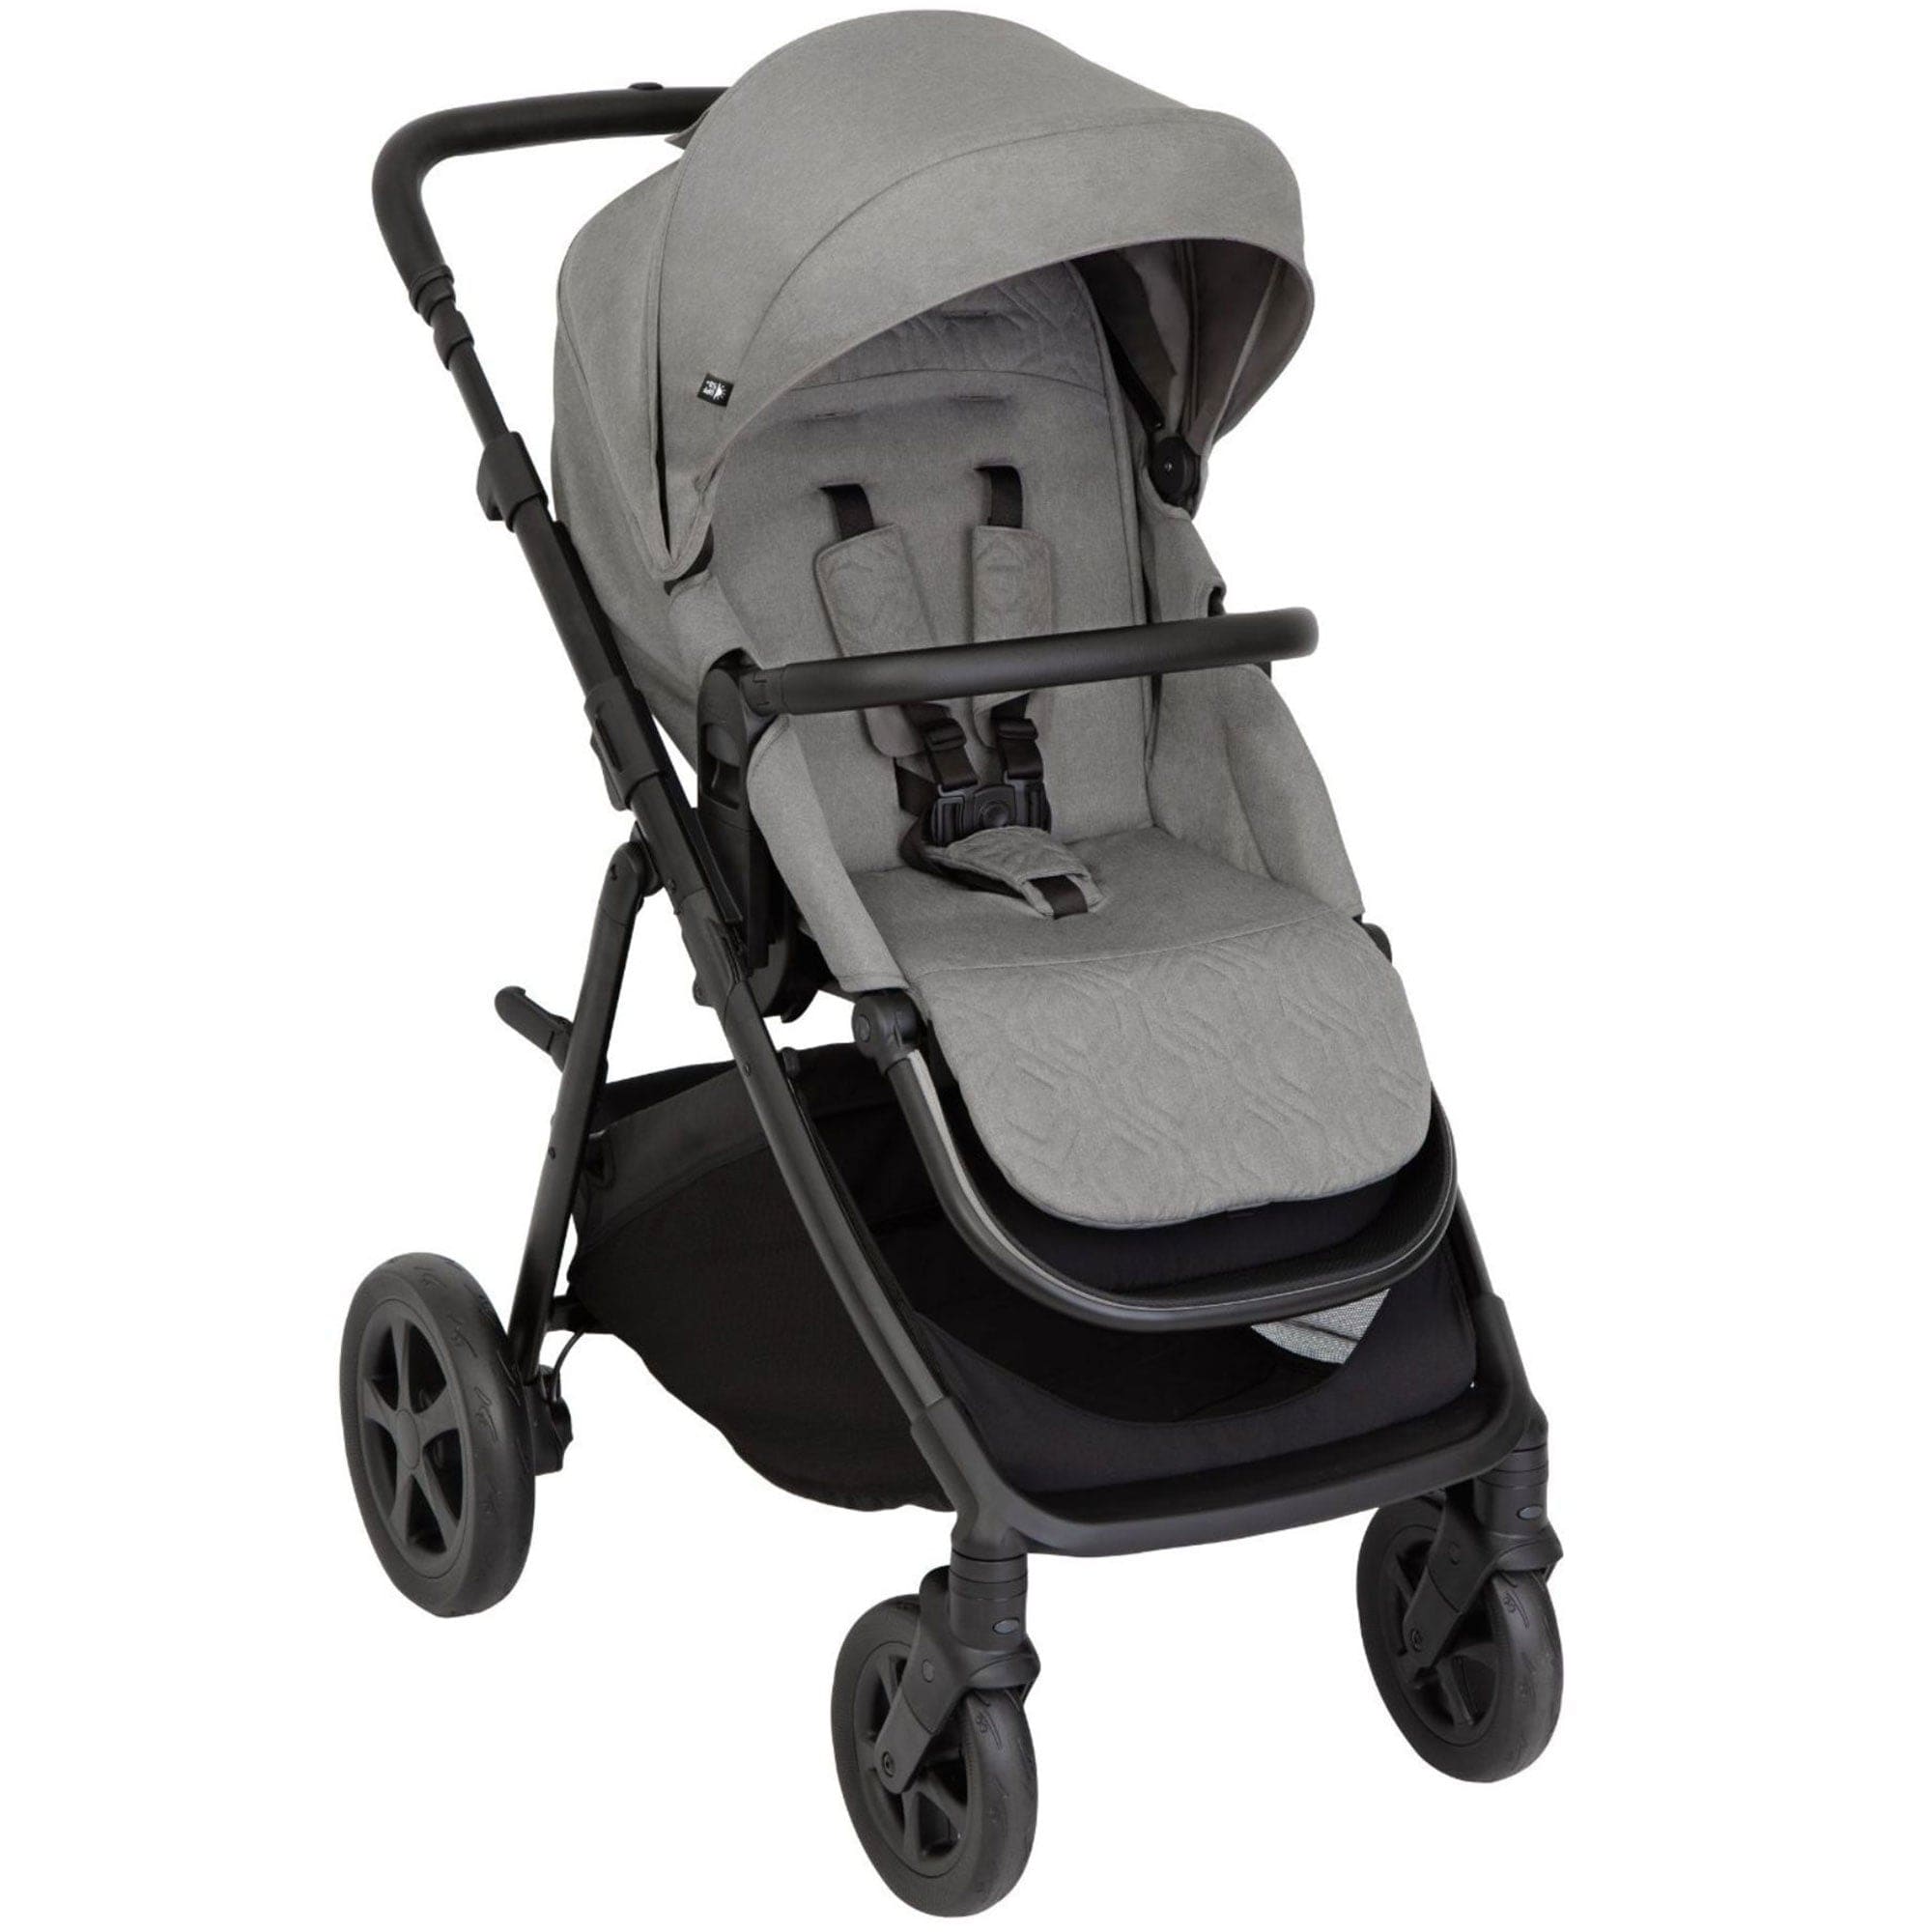 Graco Pushchairs & Buggies Graco Near2Me DLX Trio inc. Pushchair, Carrycot and Snuglite in Ash GT1910AAASH000